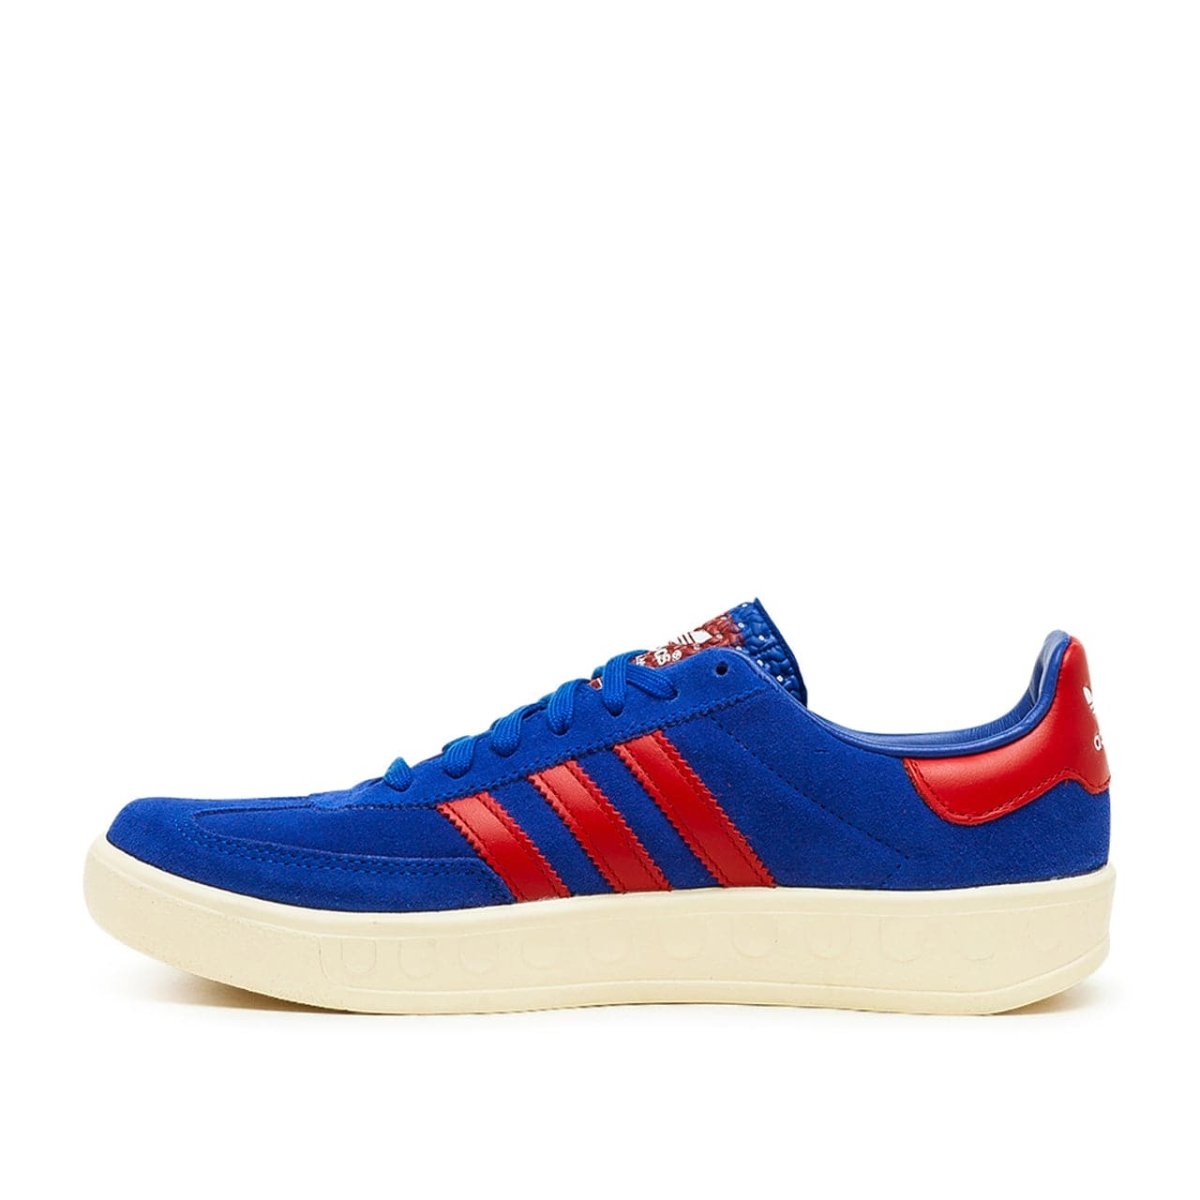 Fjord pakket Continent adidas Barcelona (Blue / Red / White) FX5642 – Allike Store